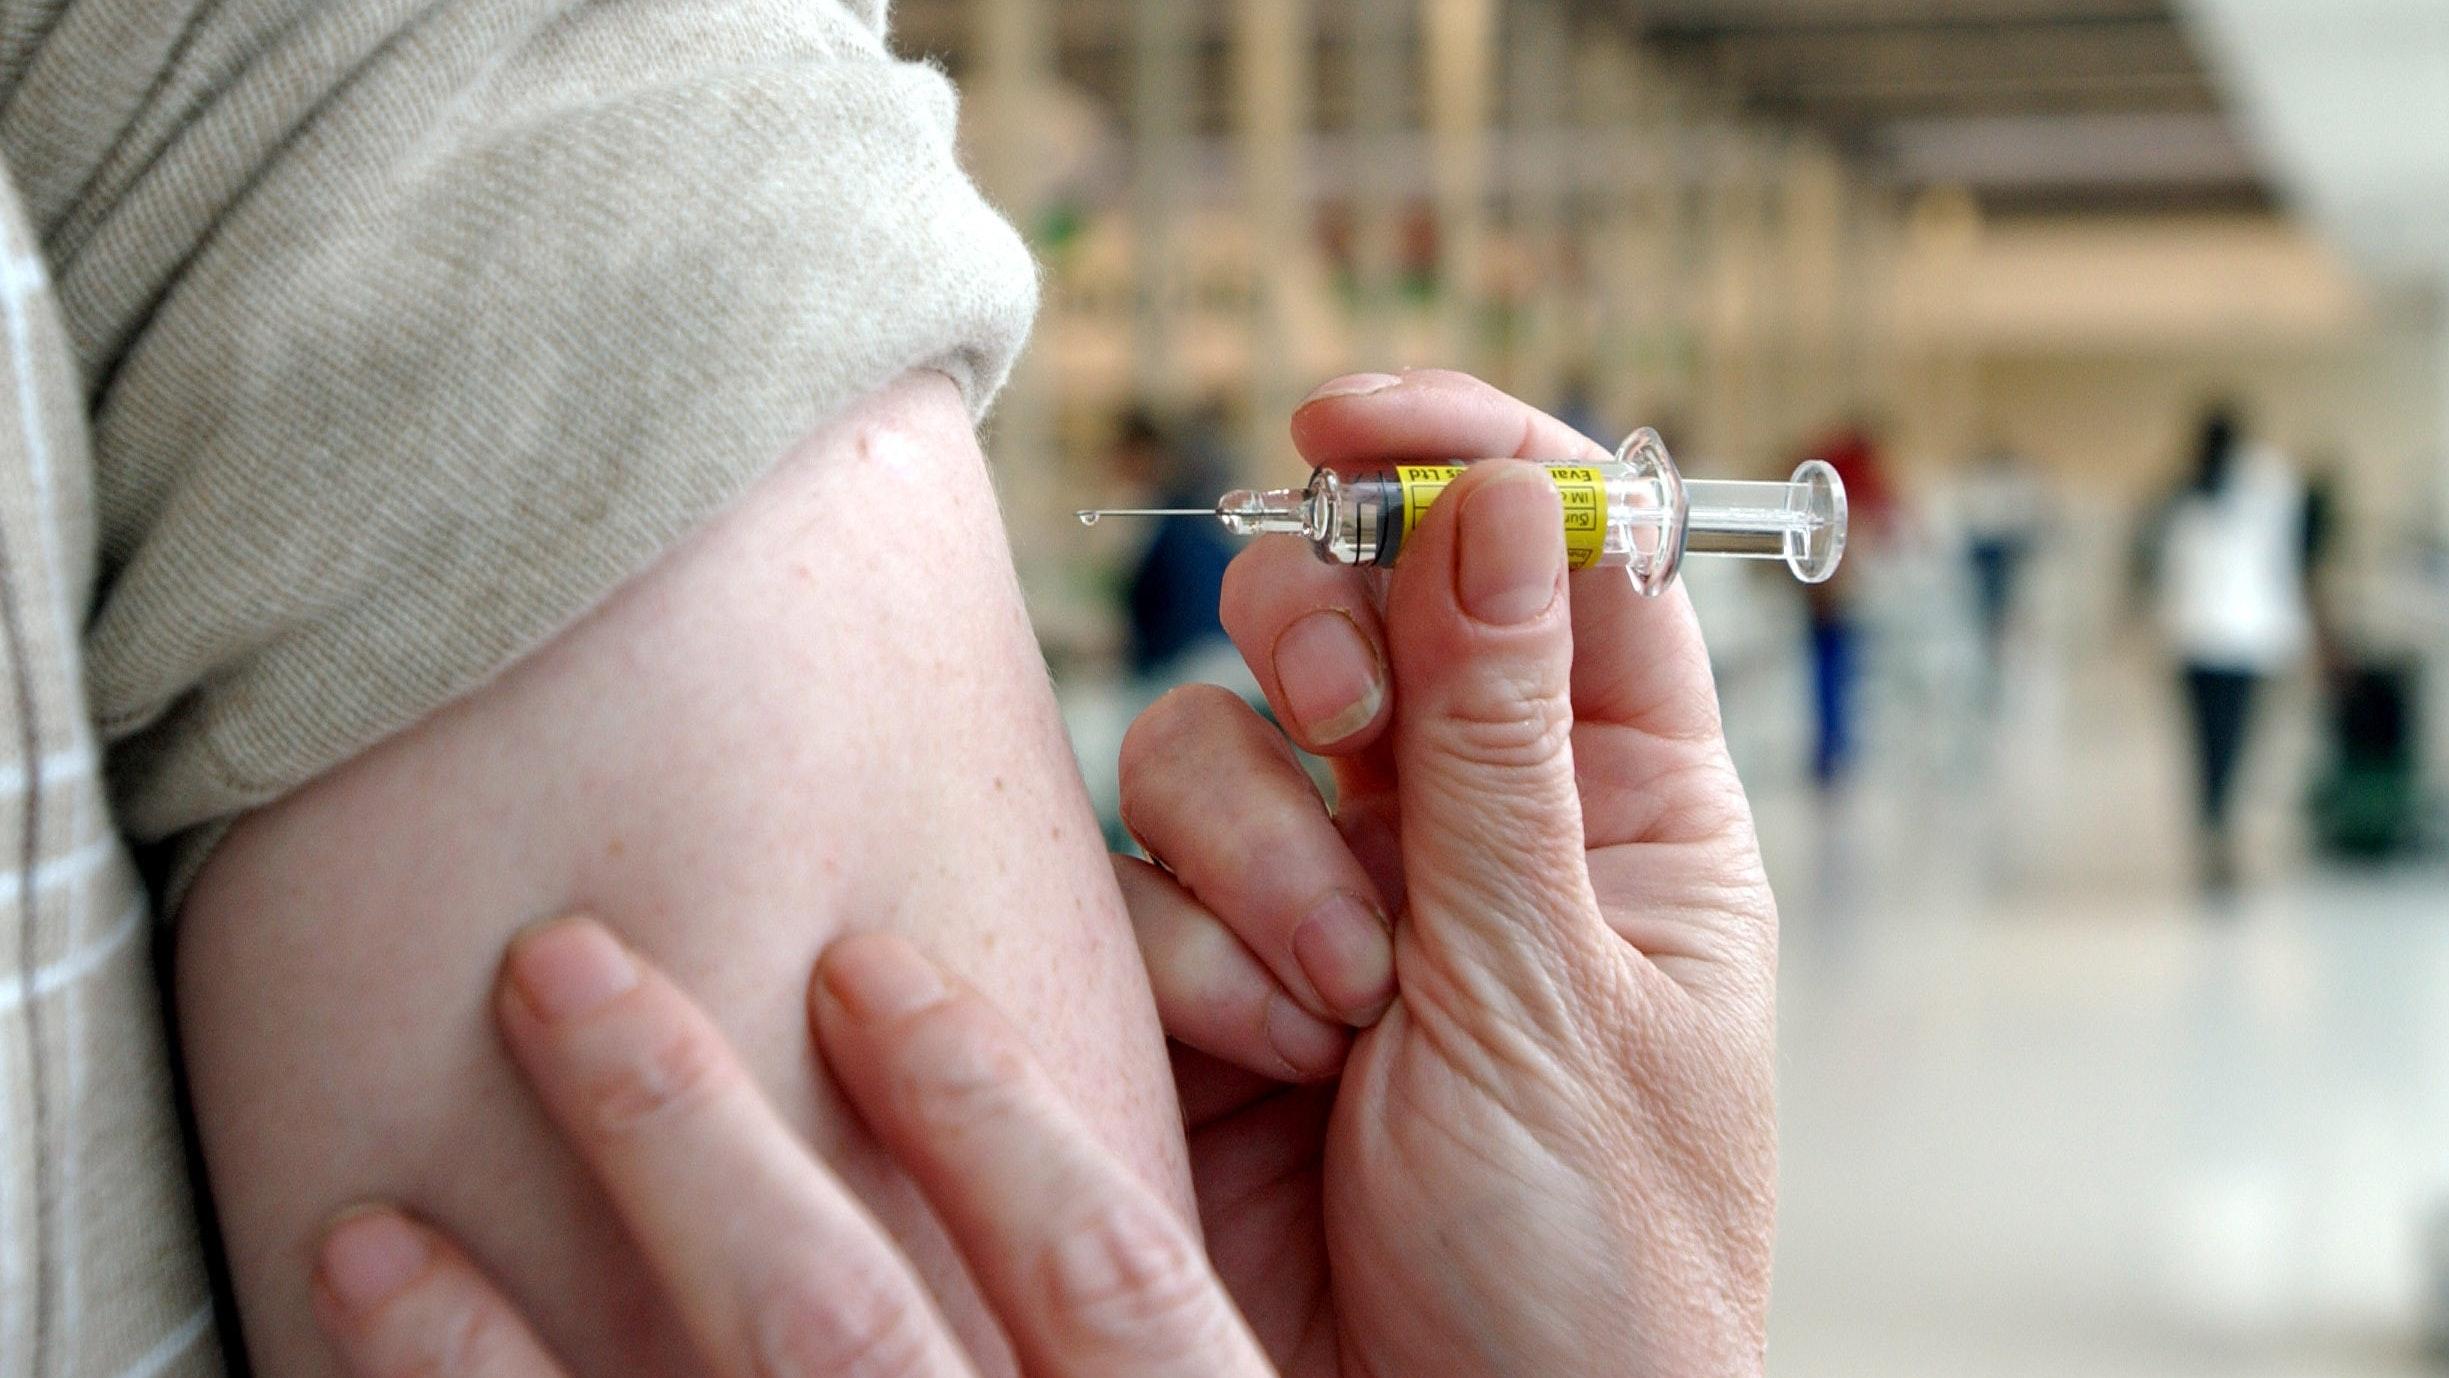 Children and staff at school to be given Hepatitis A vaccine